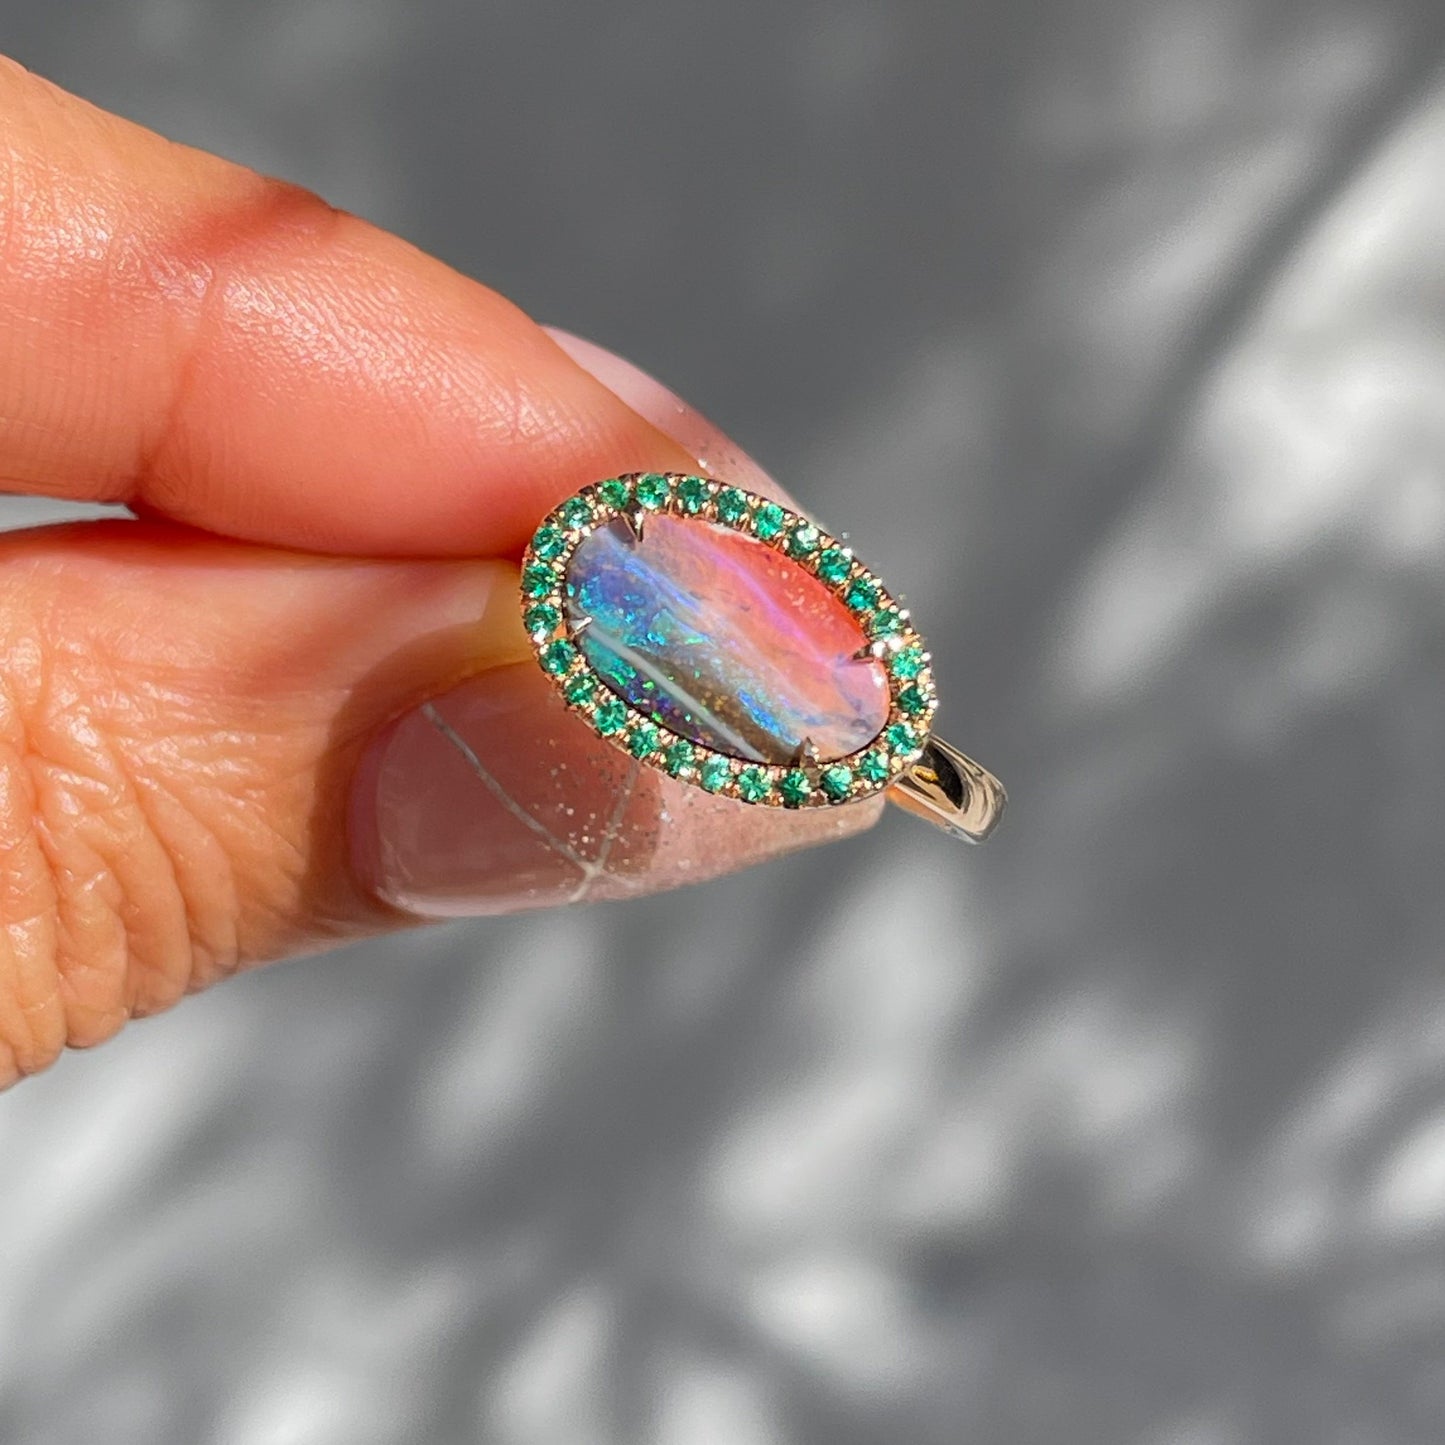 Australian Opal and Emerald Ring by NIXIN Jewelry held in sunlight. Australian boulder opal ring with emeralds.